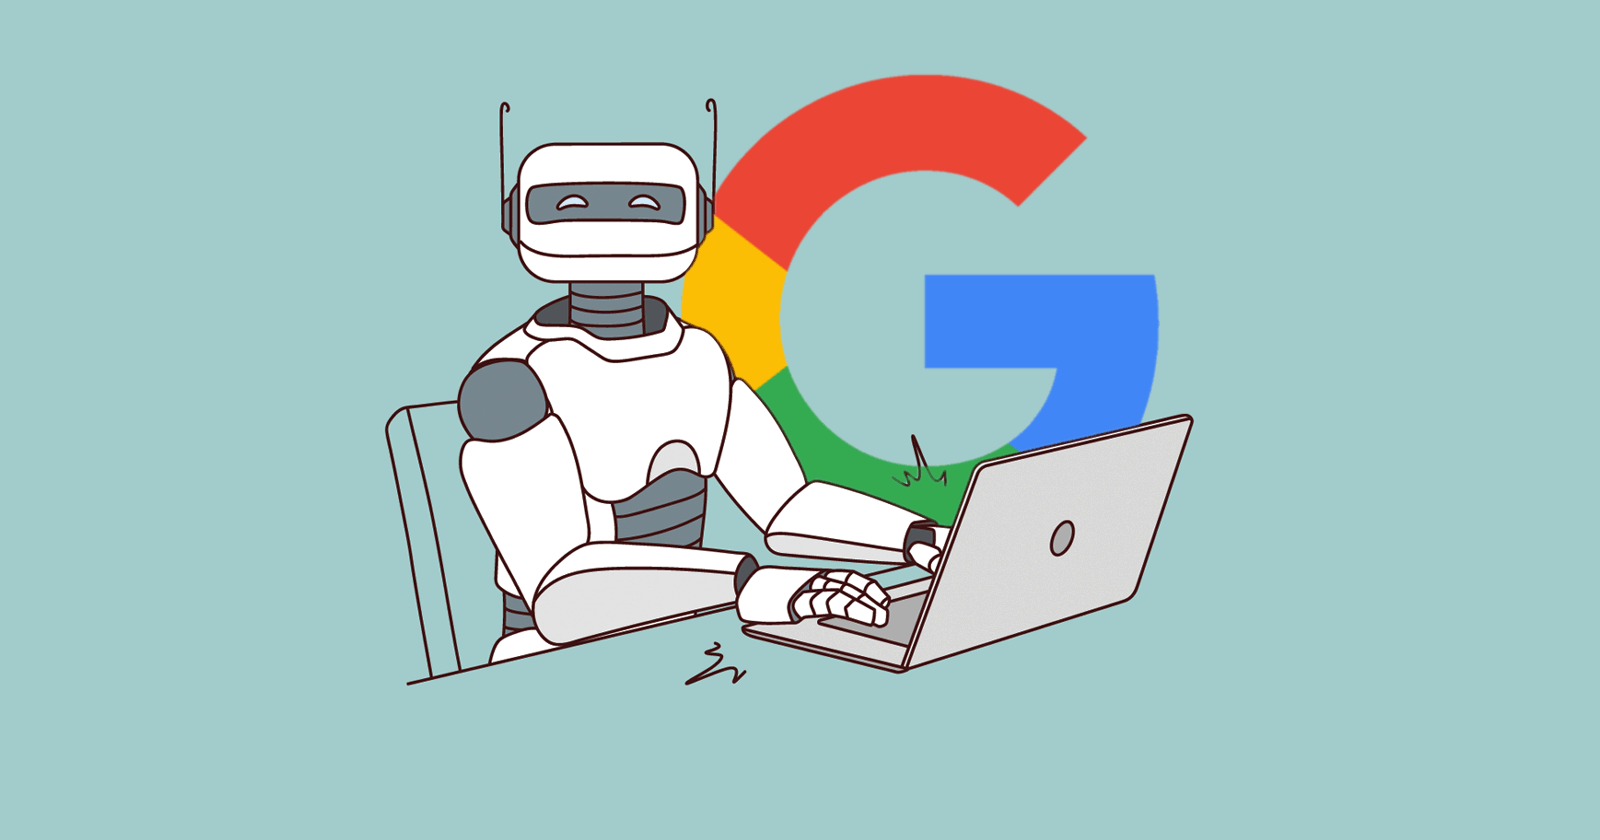 About Those Google AI Search Quality Raters